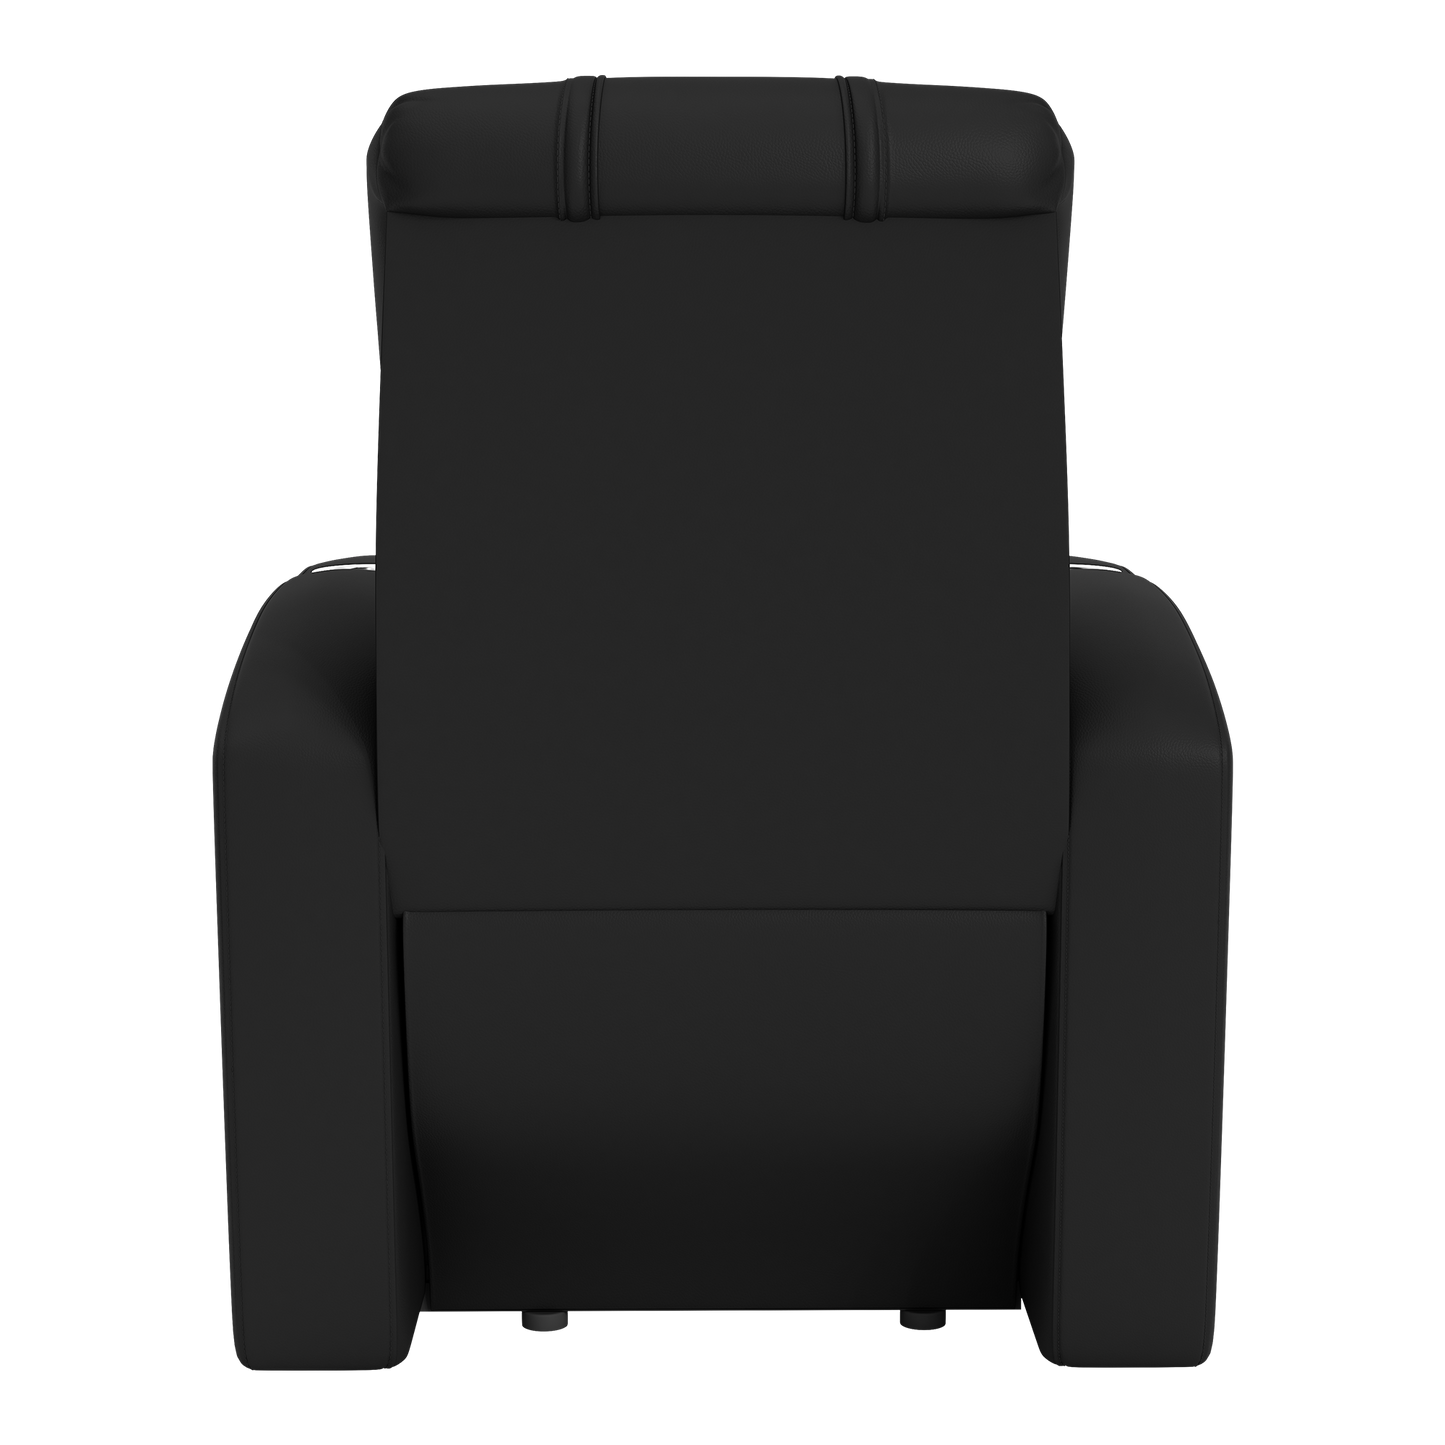 Stealth Recliner with Bucks Gaming Primary Logo [Can Only Be Shipped to Wisconsin]